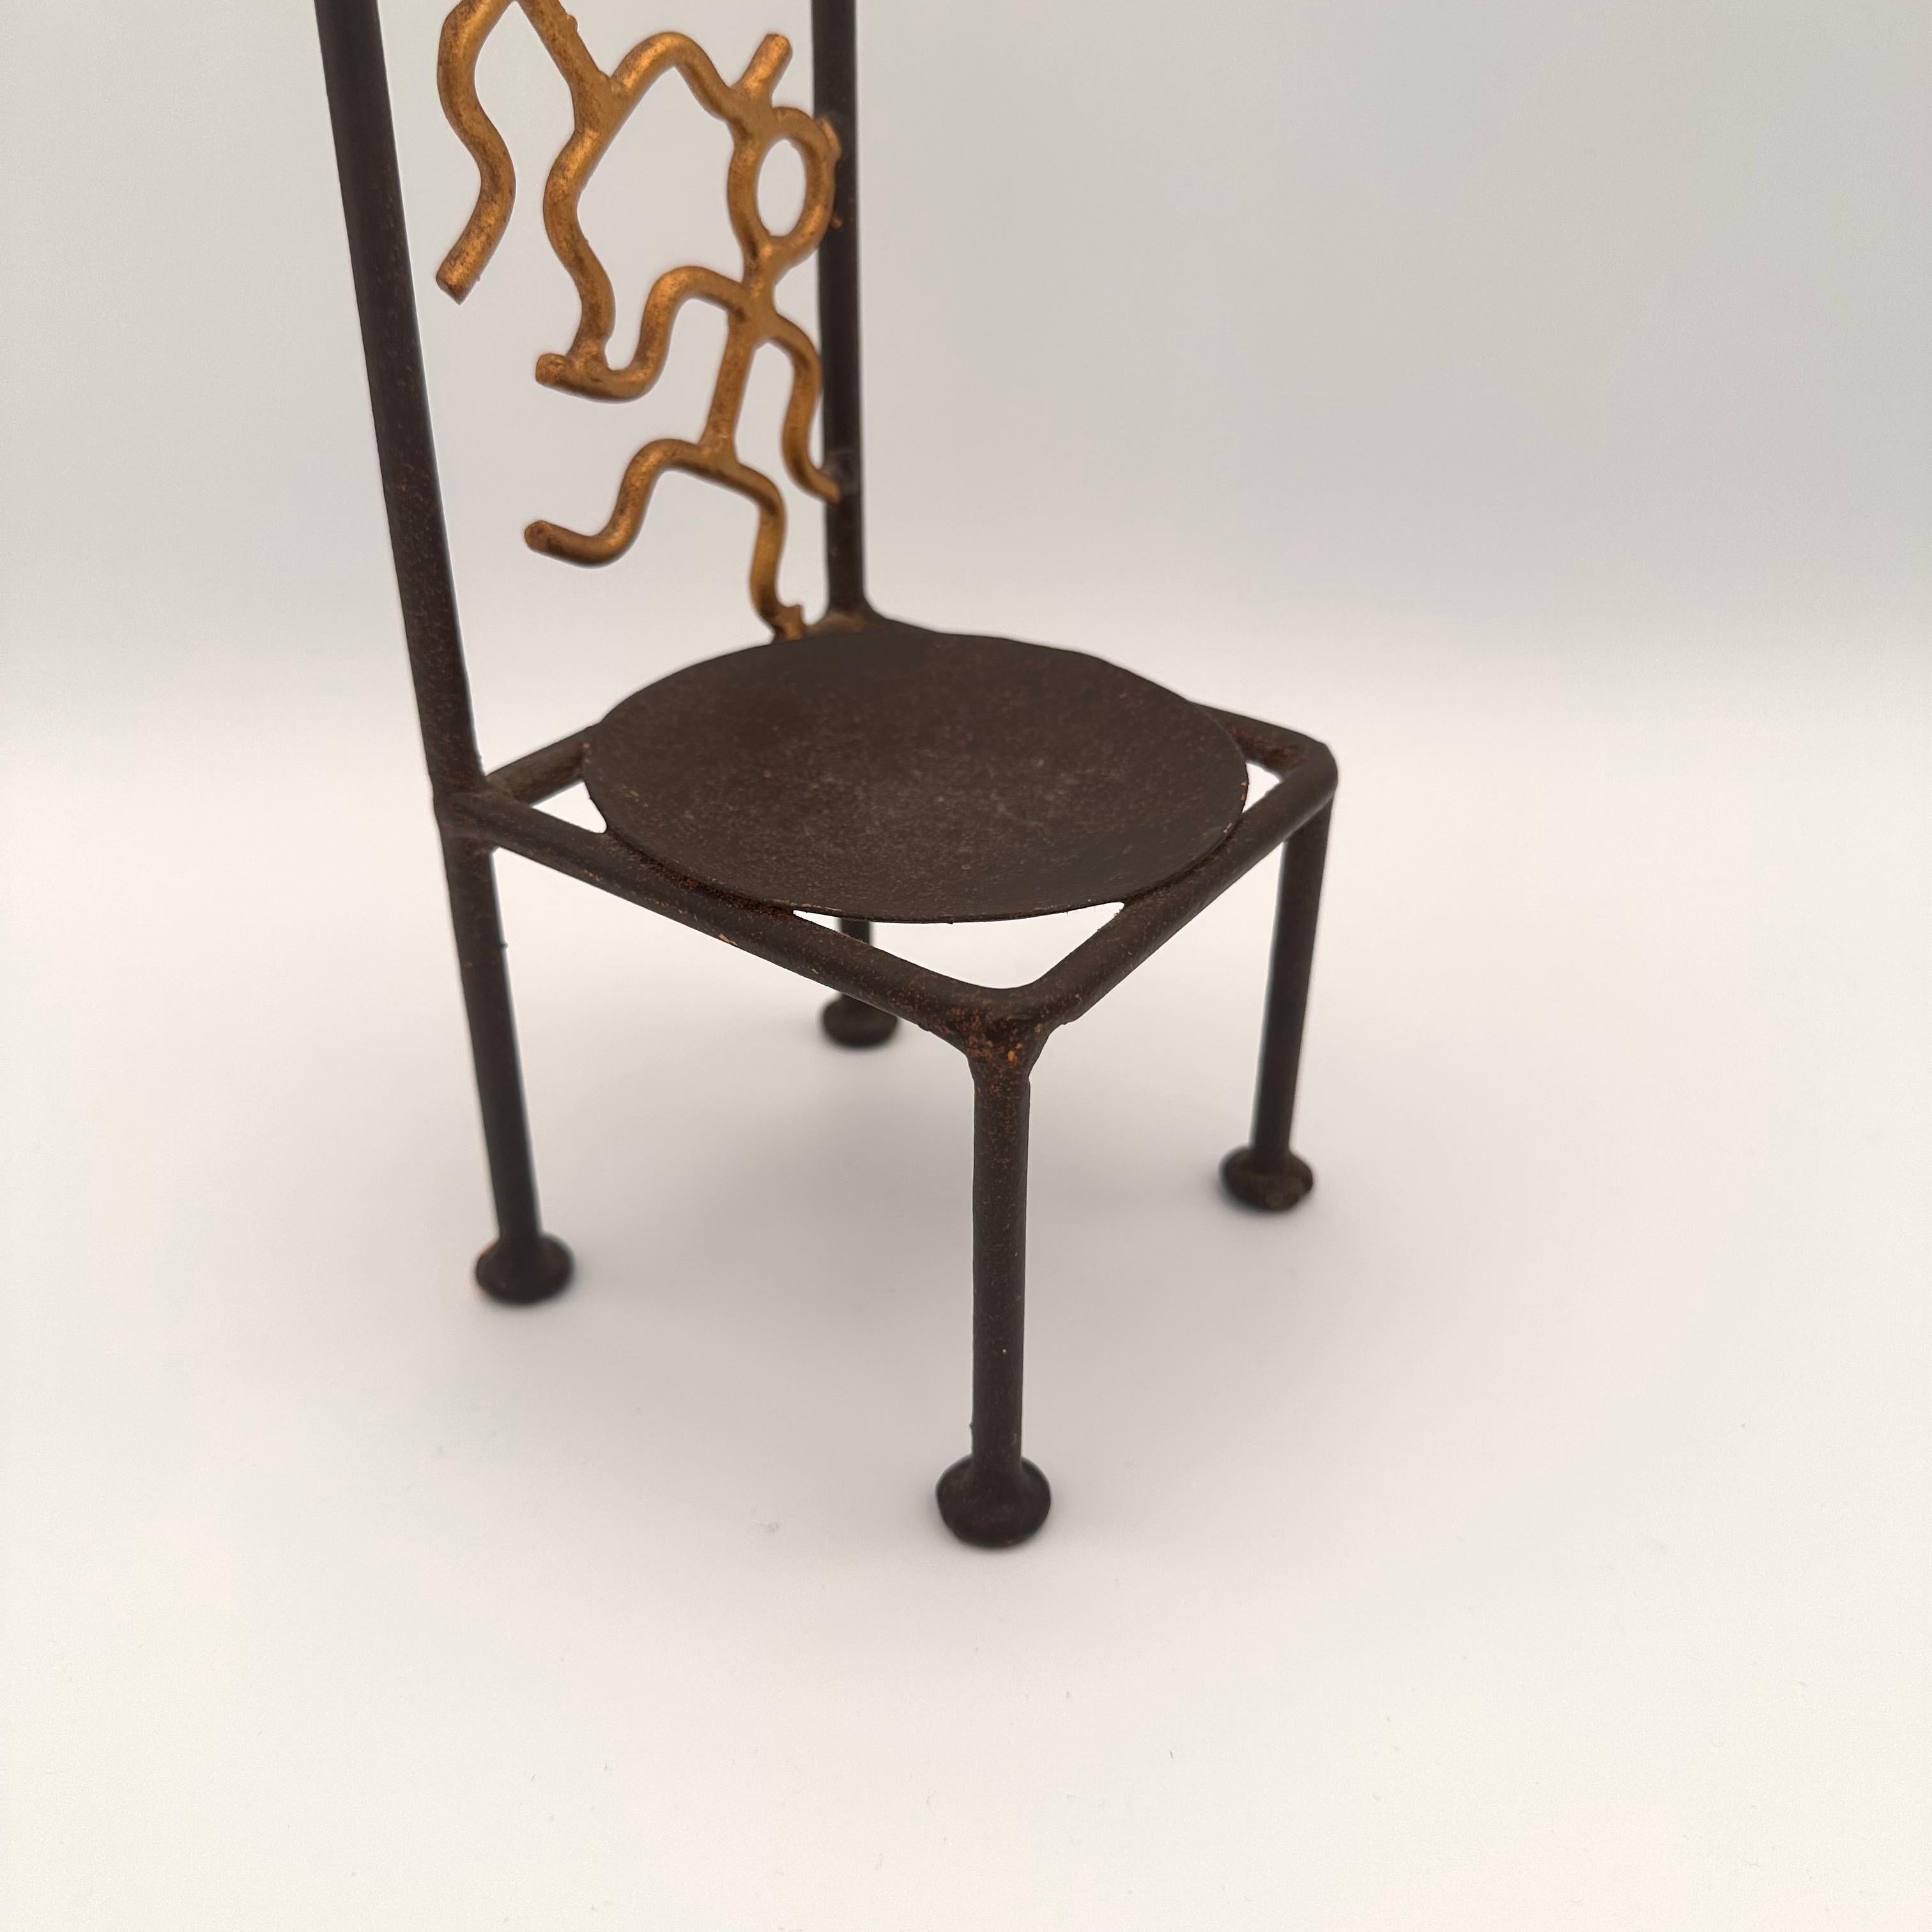 20th Century Vintage Handmade Miniature Metal Chair with Stick Figure Person Motif For Sale